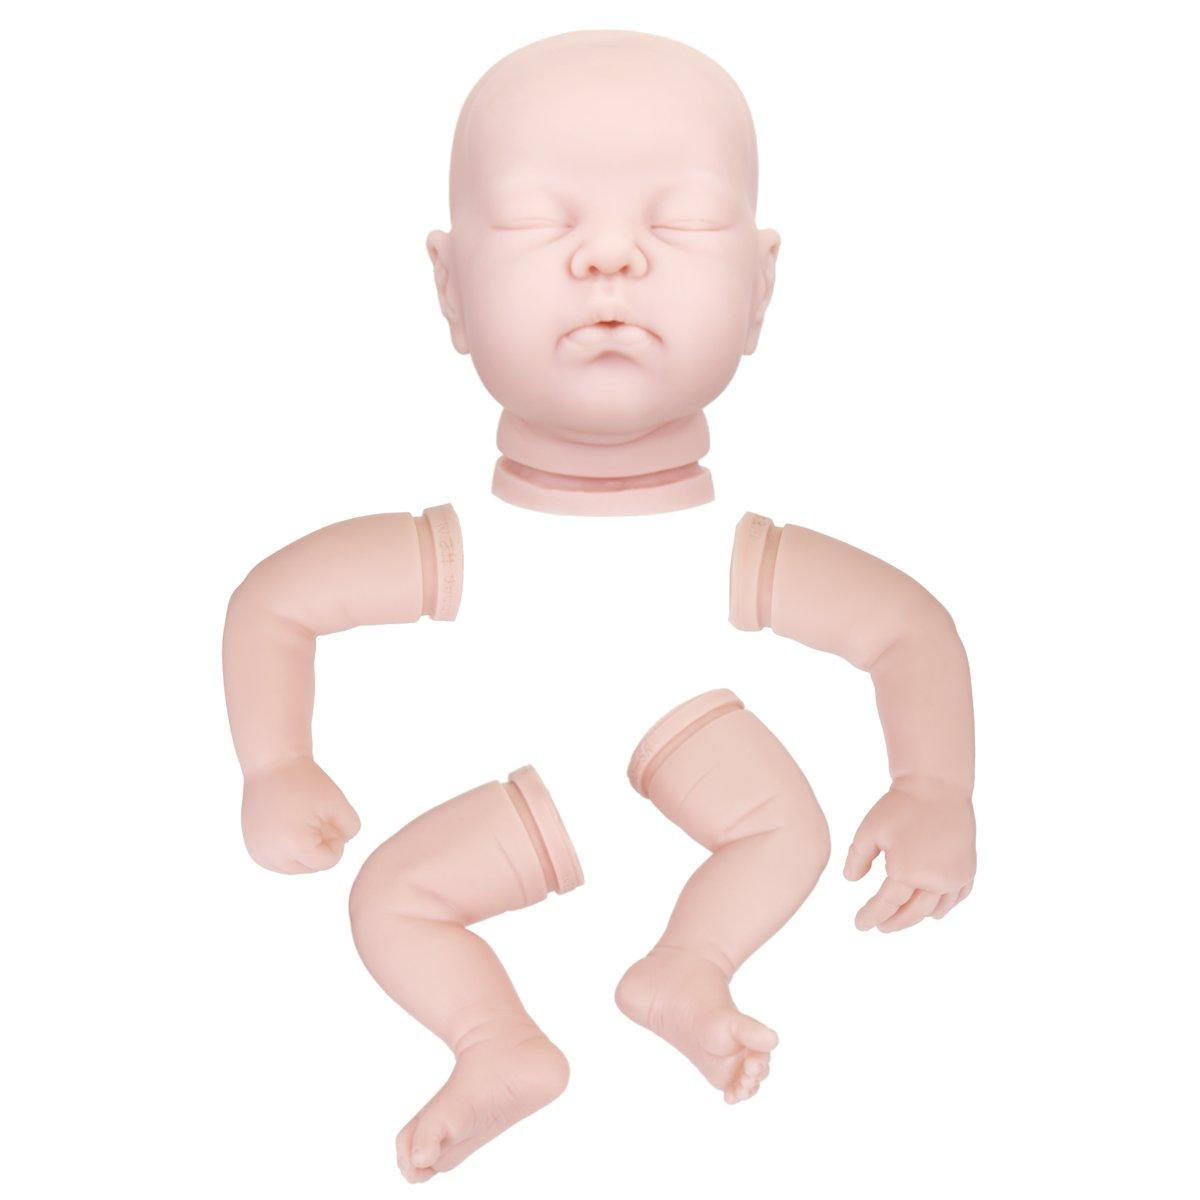 Vinyl Silicone DIY Reborn Baby Doll Accessories Lifelike Toddler Gifts No Body